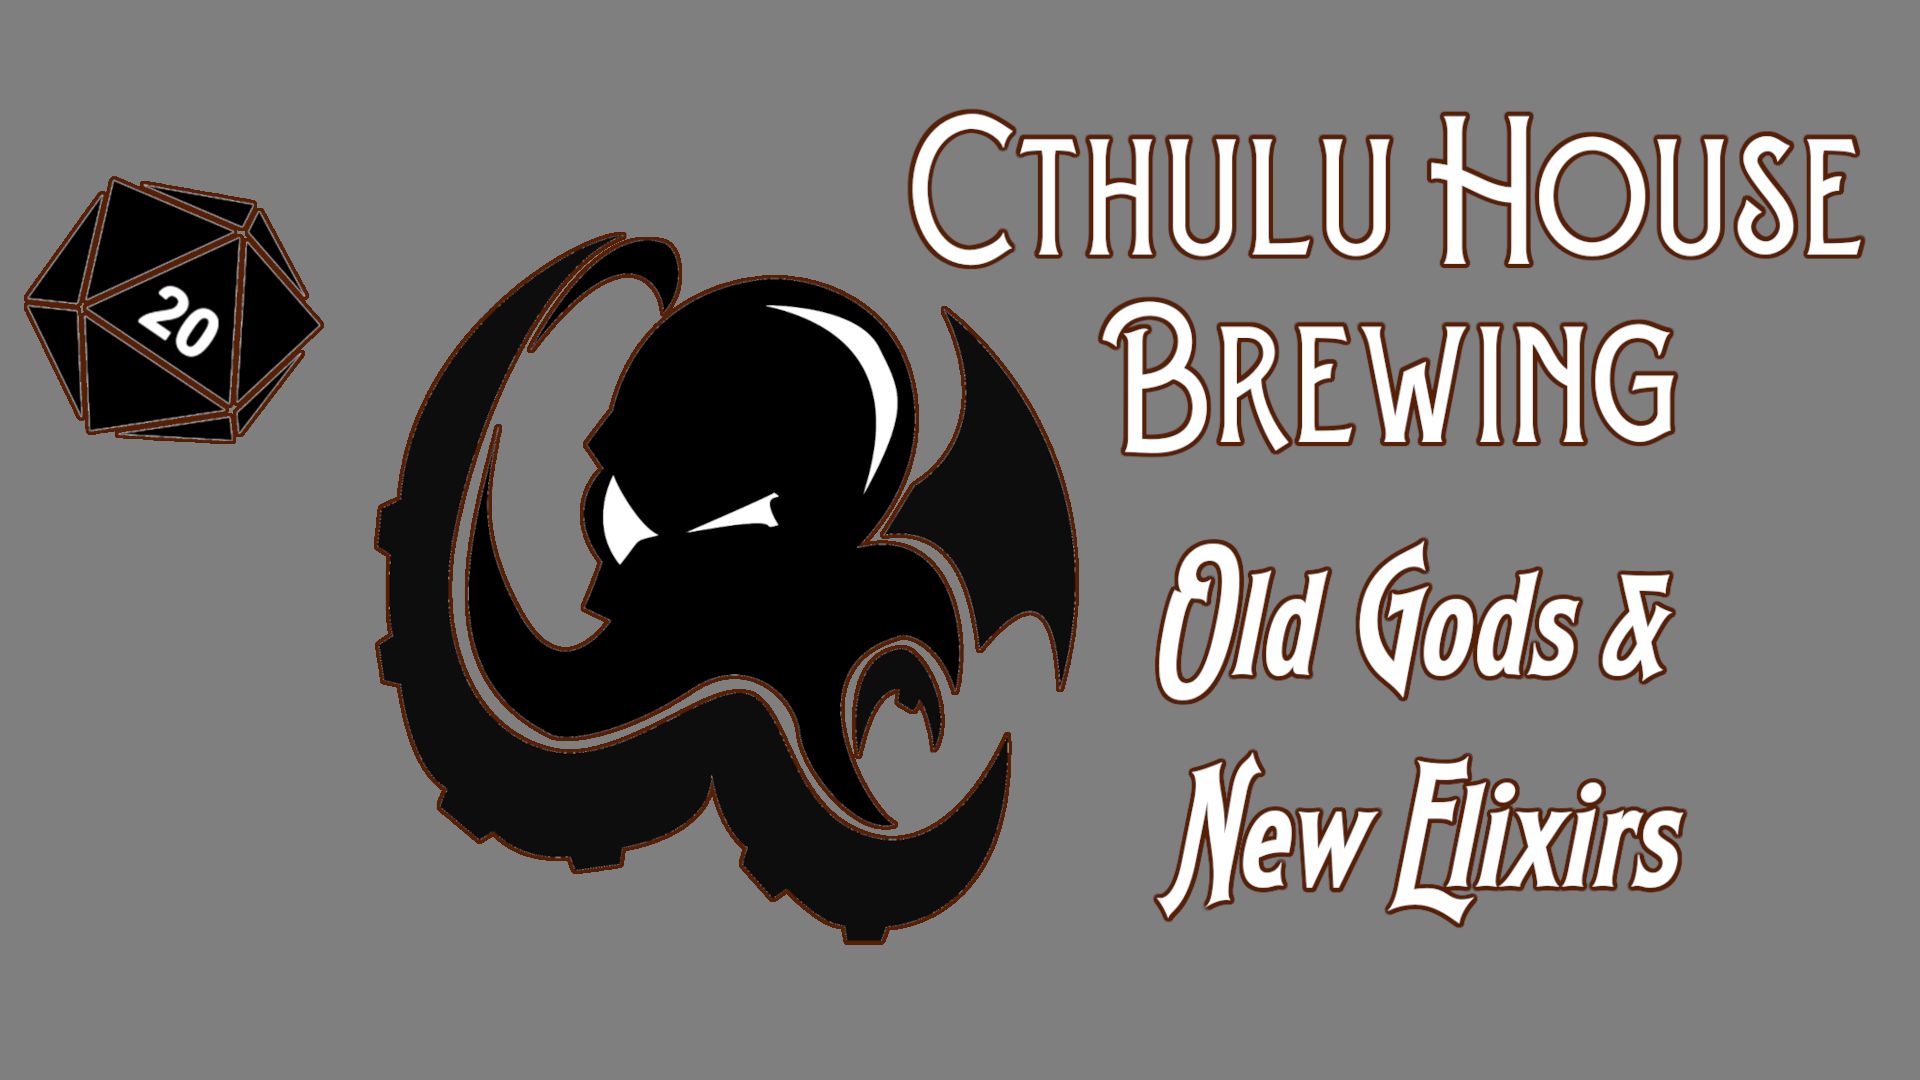 Cthulhu House Brewing